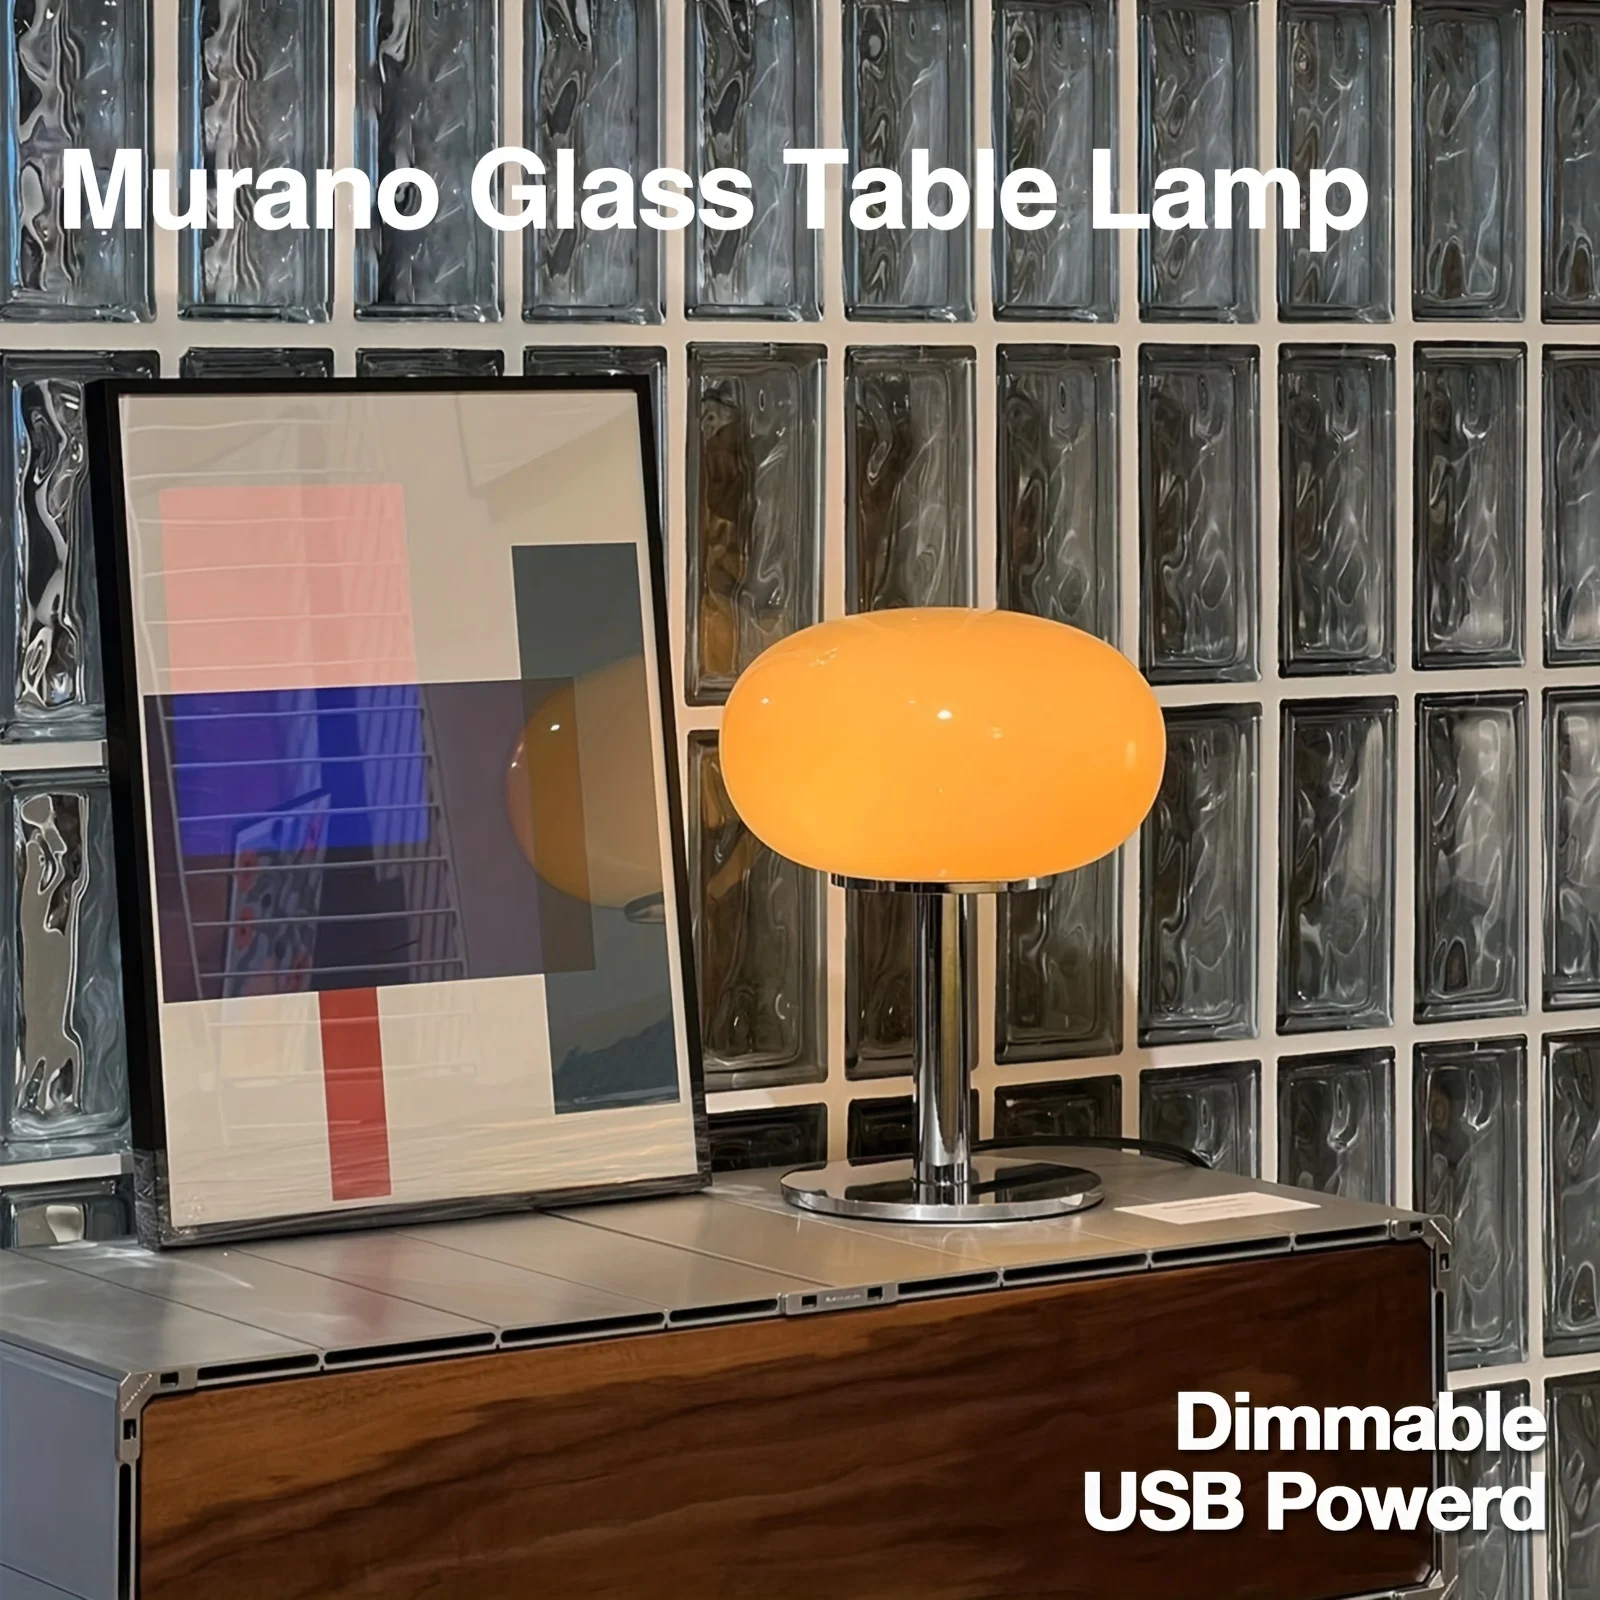 Murano Glass Table Lamp Dimmable USB Powered Ambient Light for Living Room - $60.02+